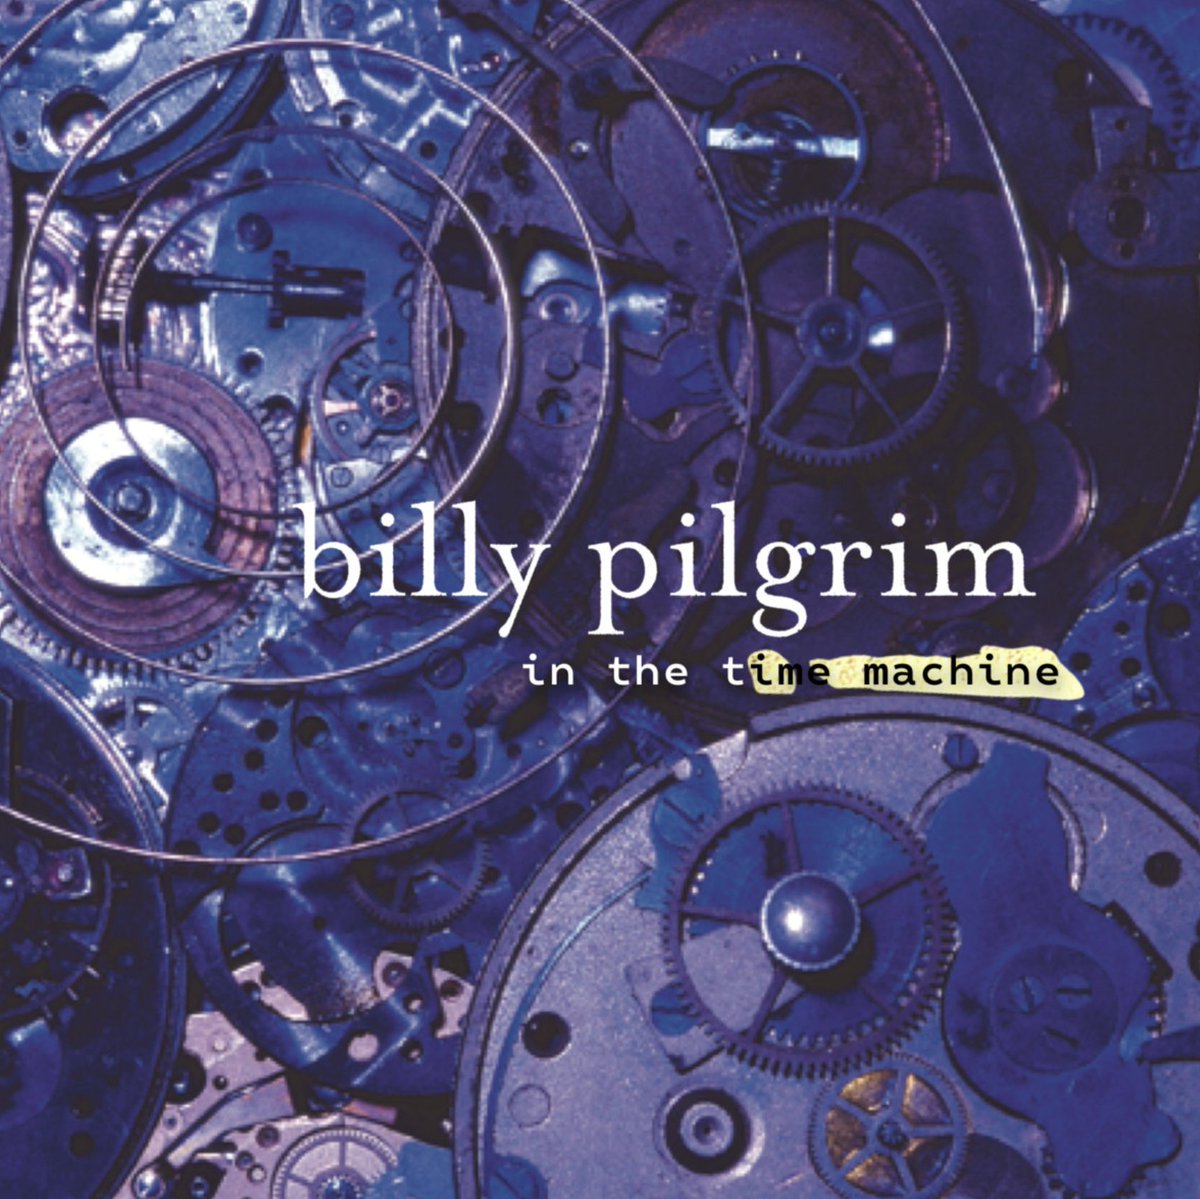 Album of the Day In the Time Machine from @_billypilgrim. One of my all-time favorite bands and fronted by @drewhyramusic and @kristianbush. If this album isn't in your collection, we can't be friends. OK, that might be a bit drastic, but it's a really f*cking good album.